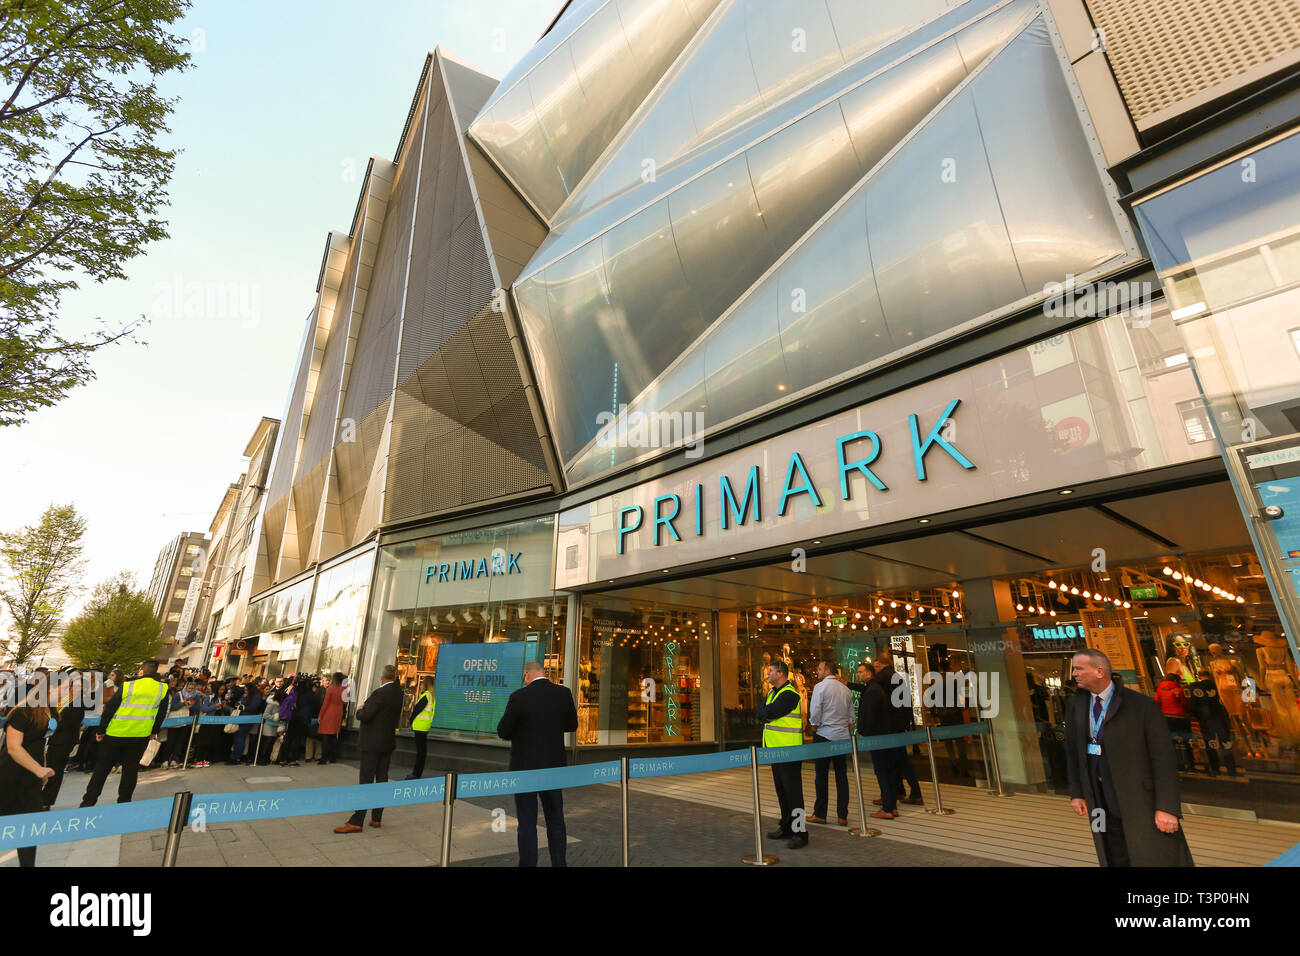 Birmingham, UK. 11th Apr, 2019. The world's biggest Primark store opens today in Birmingham, as customers queue to enter. Credit: Peter Lopeman/Alamy Live News Stock Photo